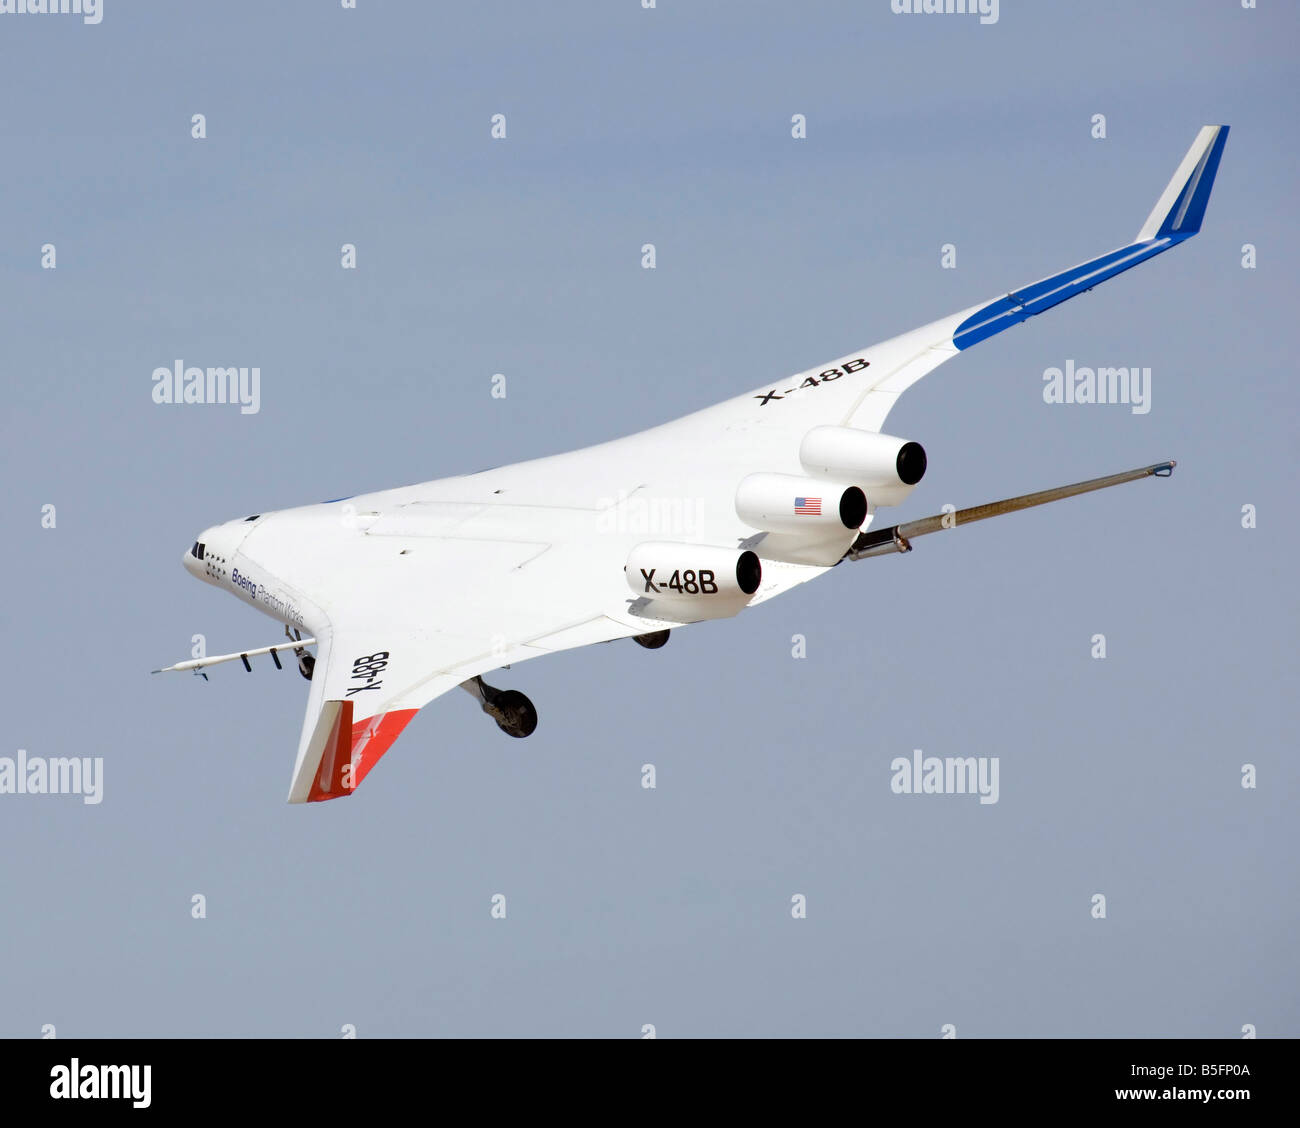 April 4, 2008 - The X-48B Blended Wing Body research aircraft banks smartly in this Block 2 flight phase image Stock Photo